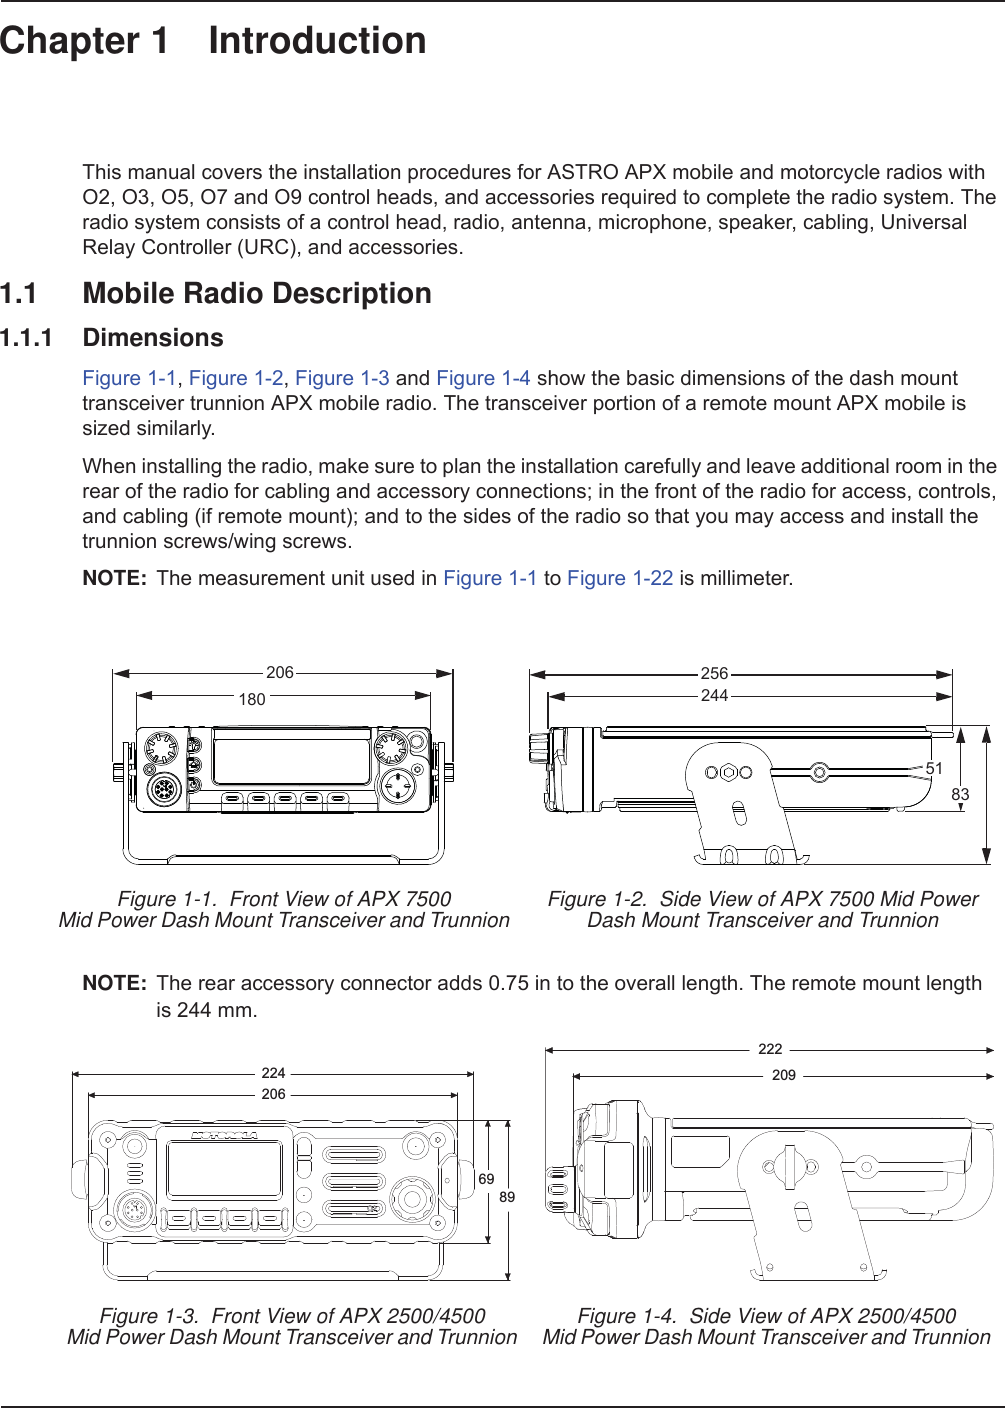 Chapter 1 IntroductionThis manual covers the installation procedures for ASTRO APX mobile and motorcycle radios with O2, O3, O5, O7 and O9 control heads, and accessories required to complete the radio system. The radio system consists of a control head, radio, antenna, microphone, speaker, cabling, Universal Relay Controller (URC), and accessories.1.1 Mobile Radio Description1.1.1 DimensionsFigure 1-1, Figure 1-2, Figure 1-3 and Figure 1-4 show the basic dimensions of the dash mount transceiver trunnion APX mobile radio. The transceiver portion of a remote mount APX mobile is sized similarly. When installing the radio, make sure to plan the installation carefully and leave additional room in the rear of the radio for cabling and accessory connections; in the front of the radio for access, controls, and cabling (if remote mount); and to the sides of the radio so that you may access and install the trunnion screws/wing screws.NOTE: The measurement unit used in Figure 1-1 to Figure 1-22 is millimeter.NOTE: The rear accessory connector adds 0.75 in to the overall length. The remote mount lengthis 244 mm.Figure 1-1.  Front View of APX 7500 Mid Power Dash Mount Transceiver and Trunnion Figure 1-2.  Side View of APX 7500 Mid PowerDash Mount Transceiver and TrunnionFigure 1-3.  Front View of APX 2500/4500 Mid Power Dash Mount Transceiver and Trunnion Figure 1-4.  Side View of APX 2500/4500 Mid Power Dash Mount Transceiver and Trunnion20618025624451832242066989222209